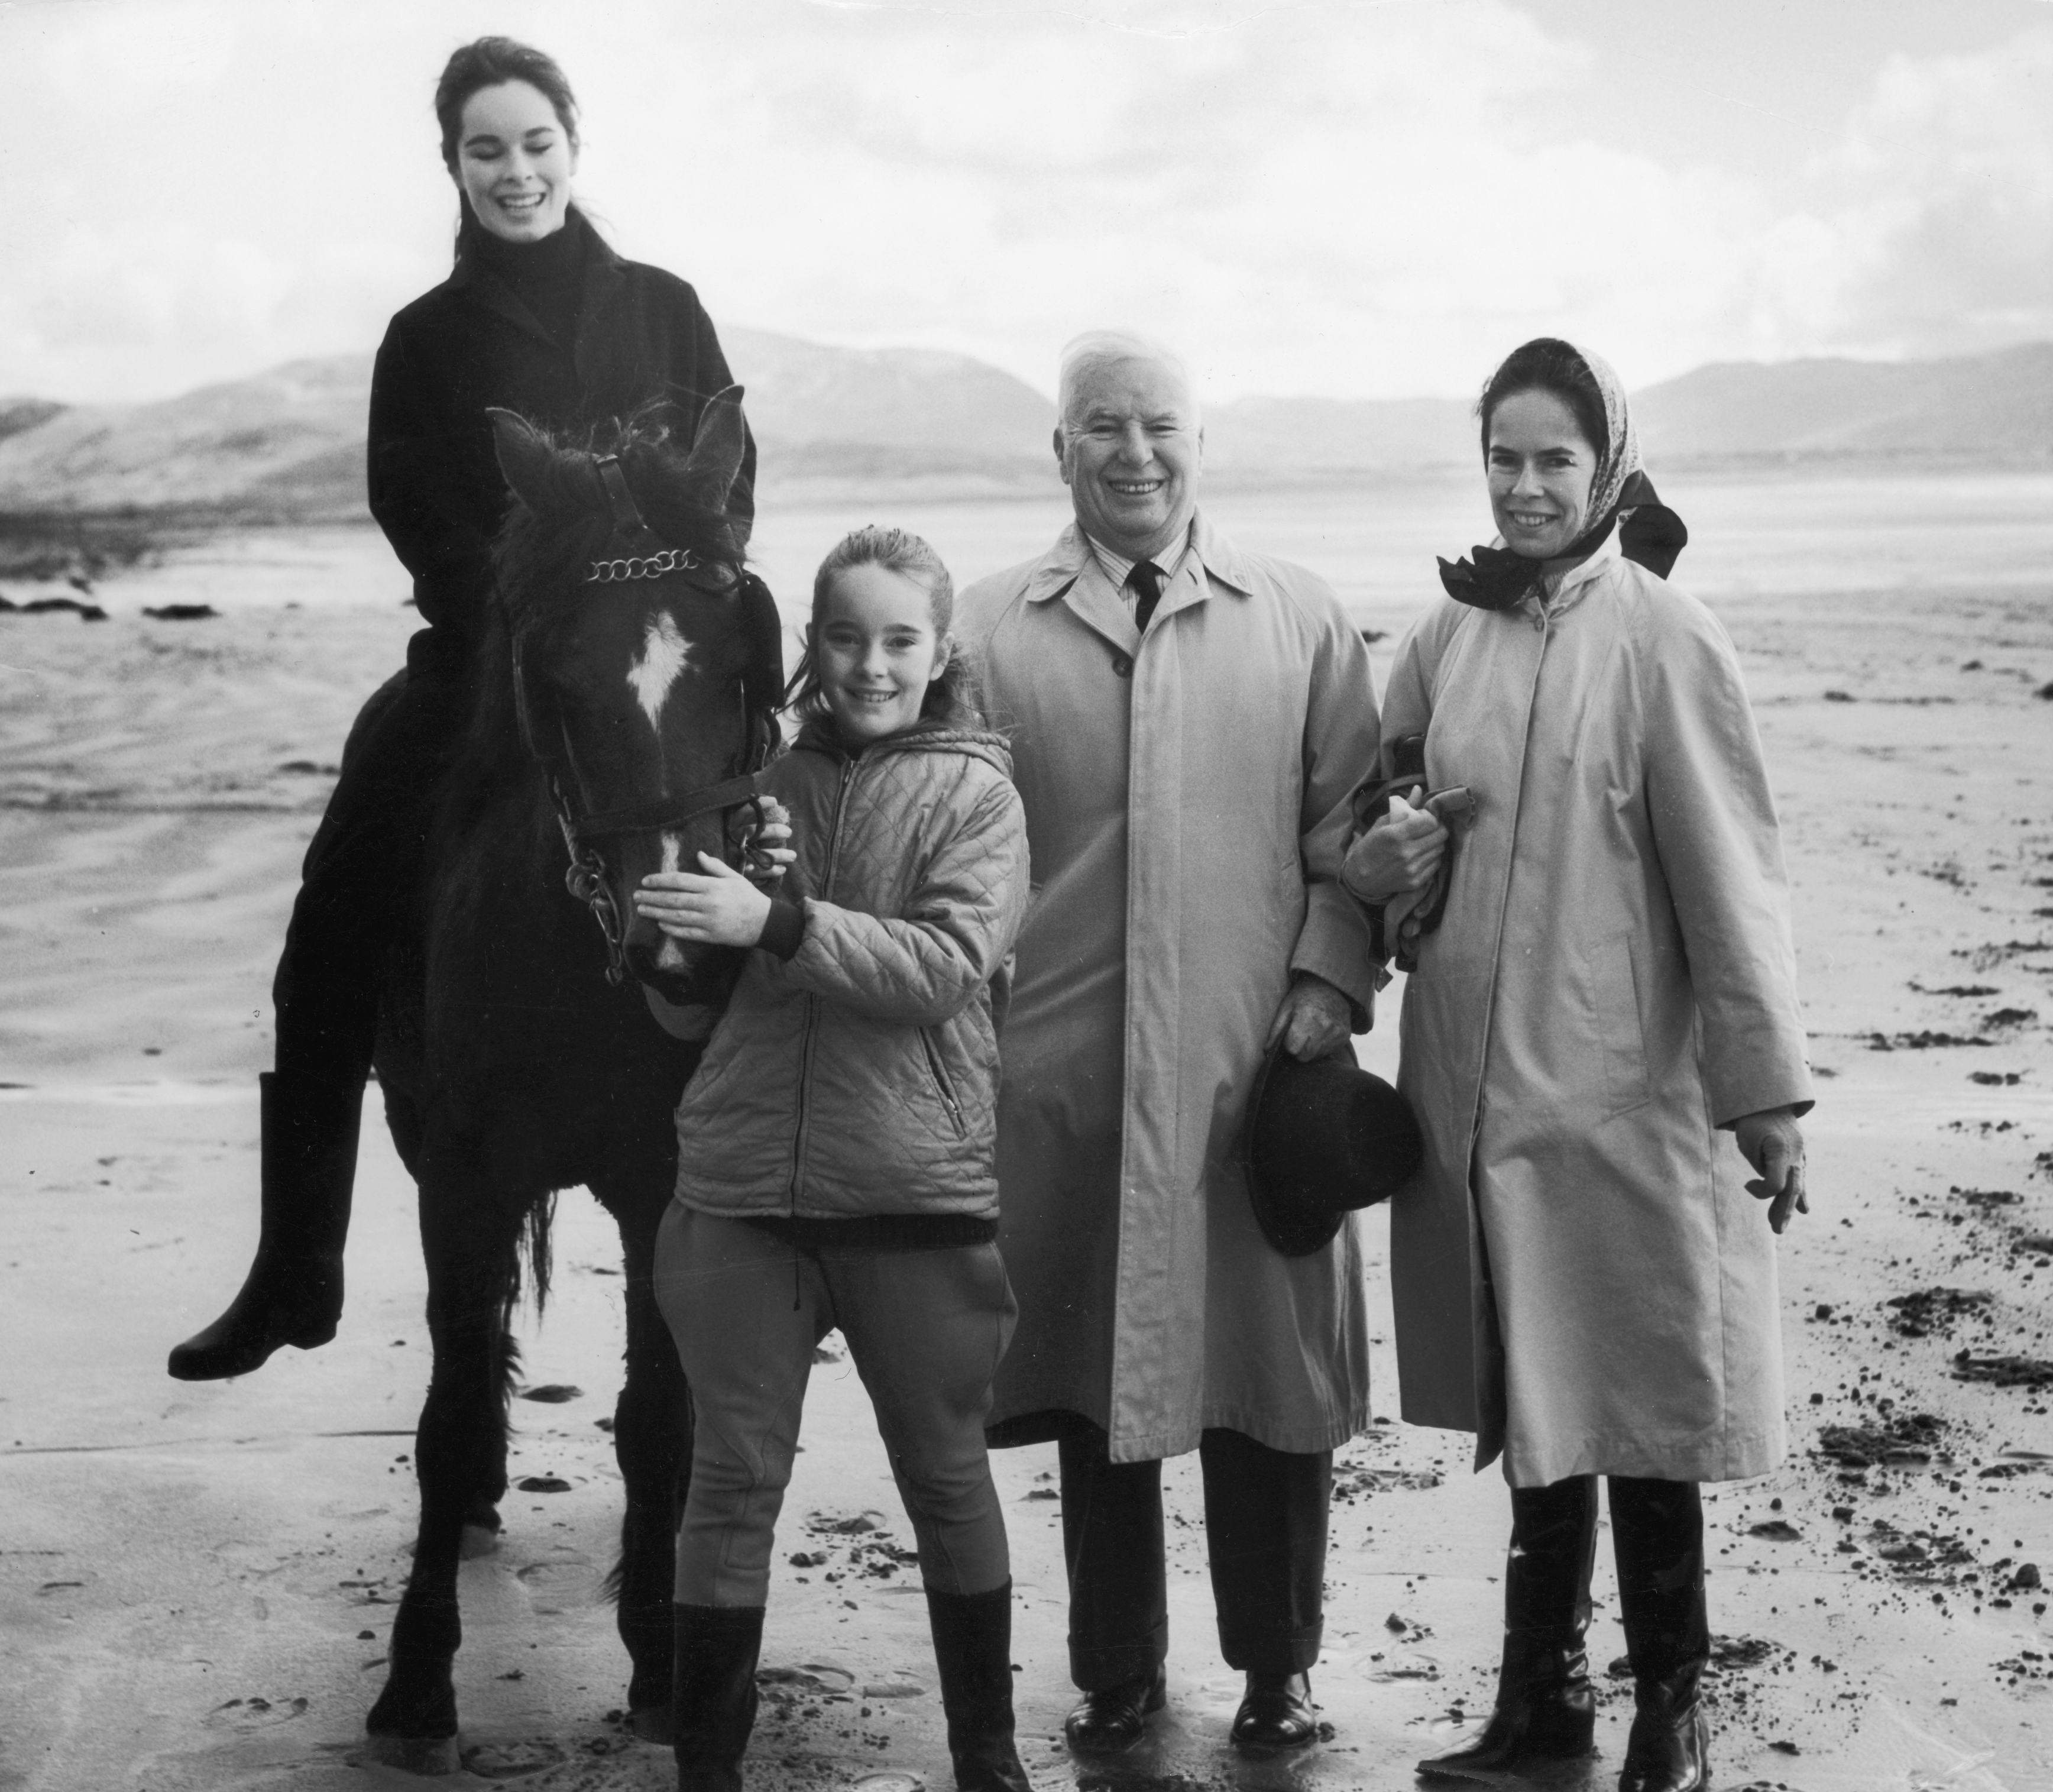 Charlie Chaplin stands with his wife Oona and two of his daughters, Geraldine and Jane, near a lake in Ireland circa 1965 | Source: Getty Images